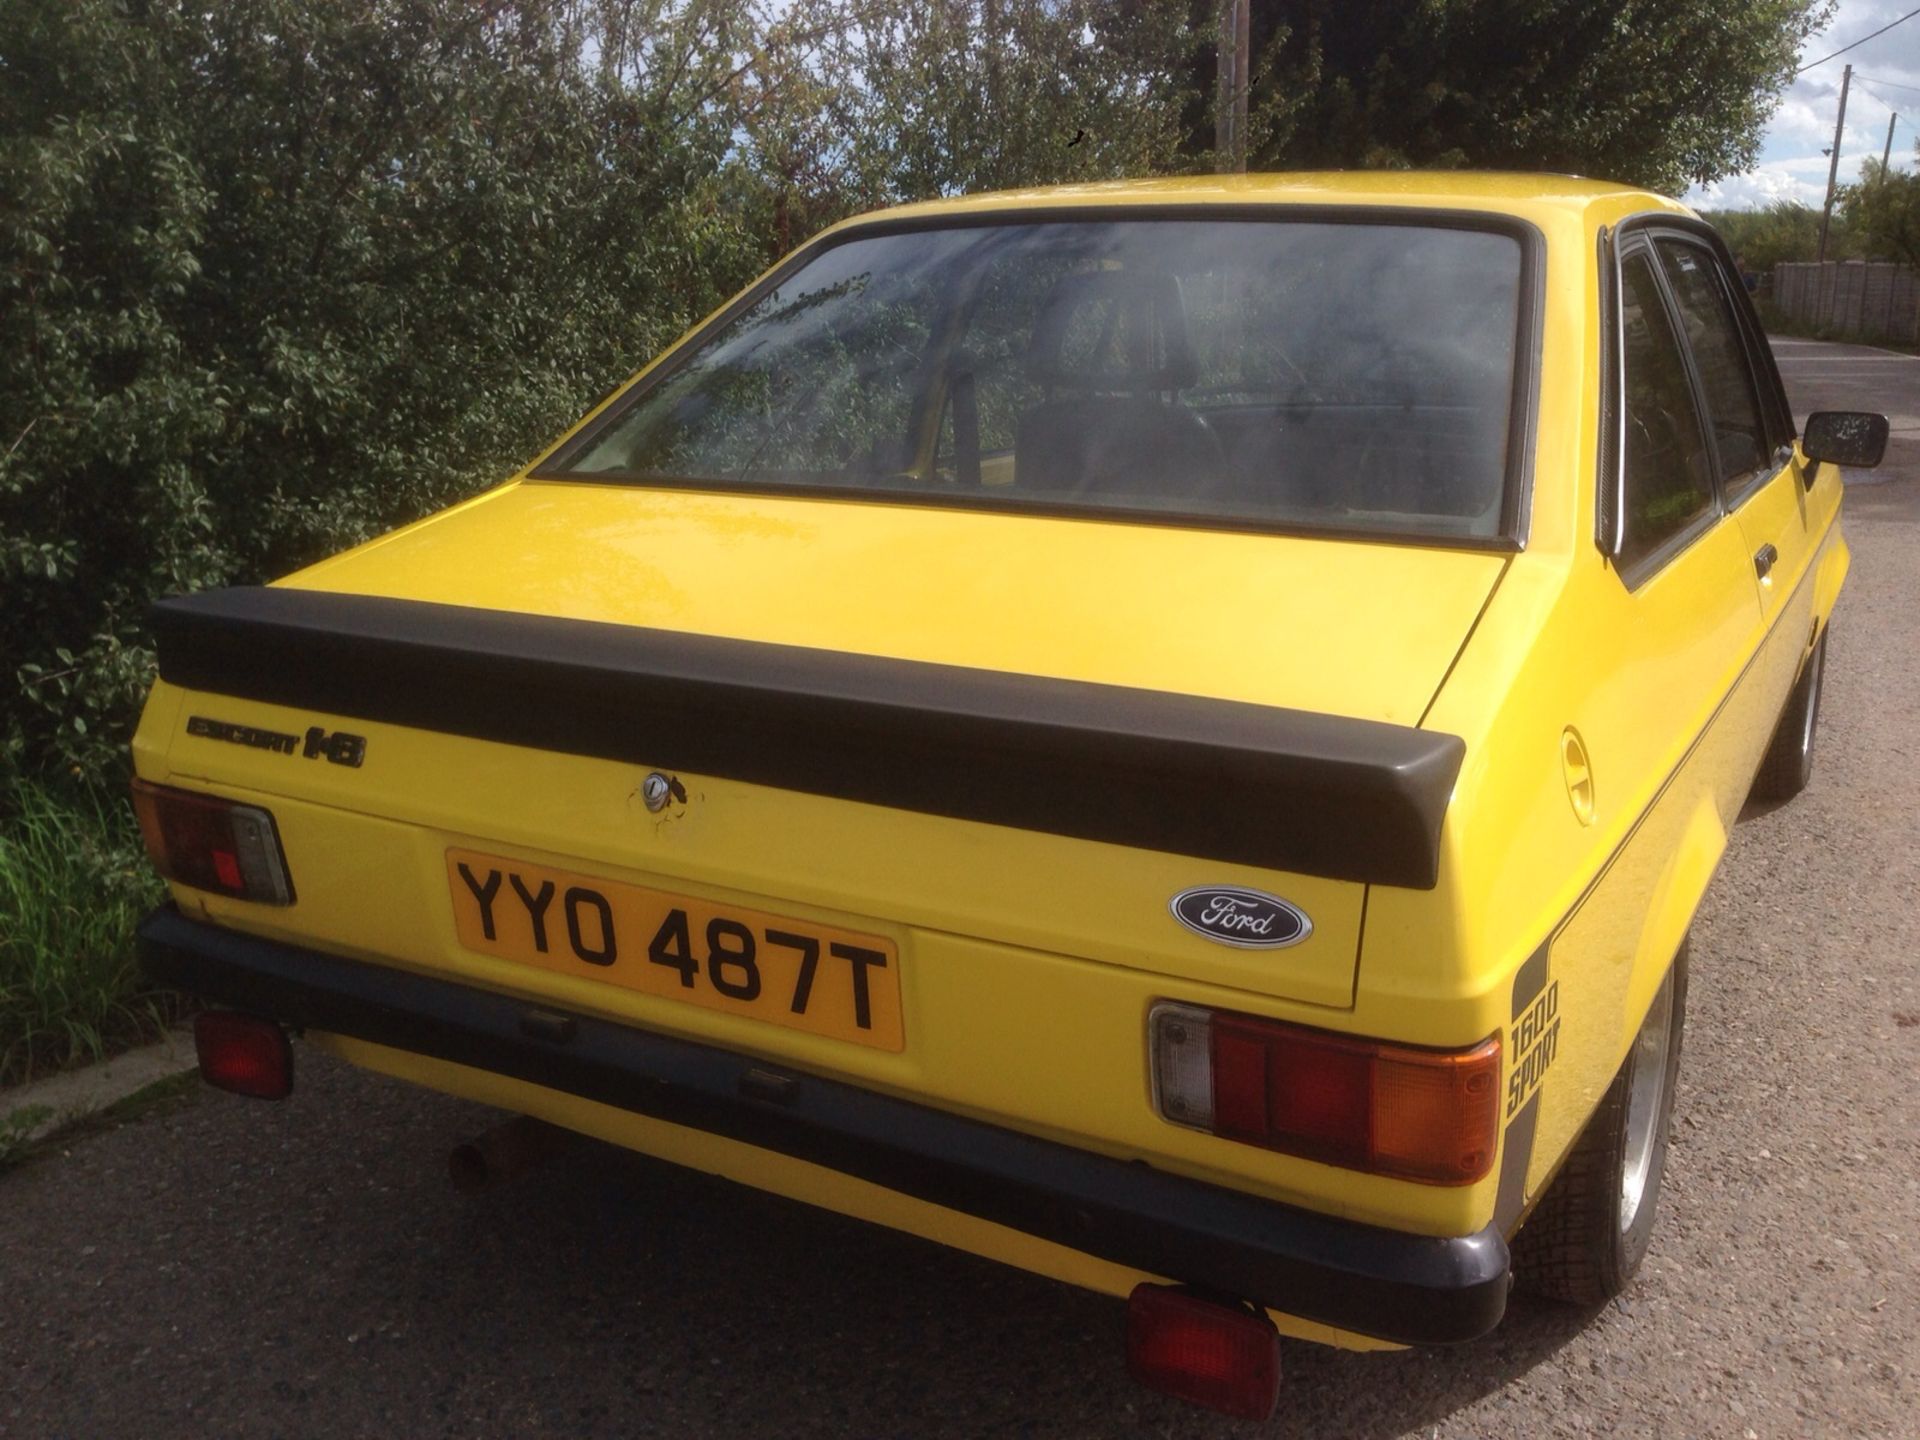 1979/T Ford Escort mk2 1600 Sport - in Signal yellow -  UK car  (545 miles) since rebuild - Image 13 of 54